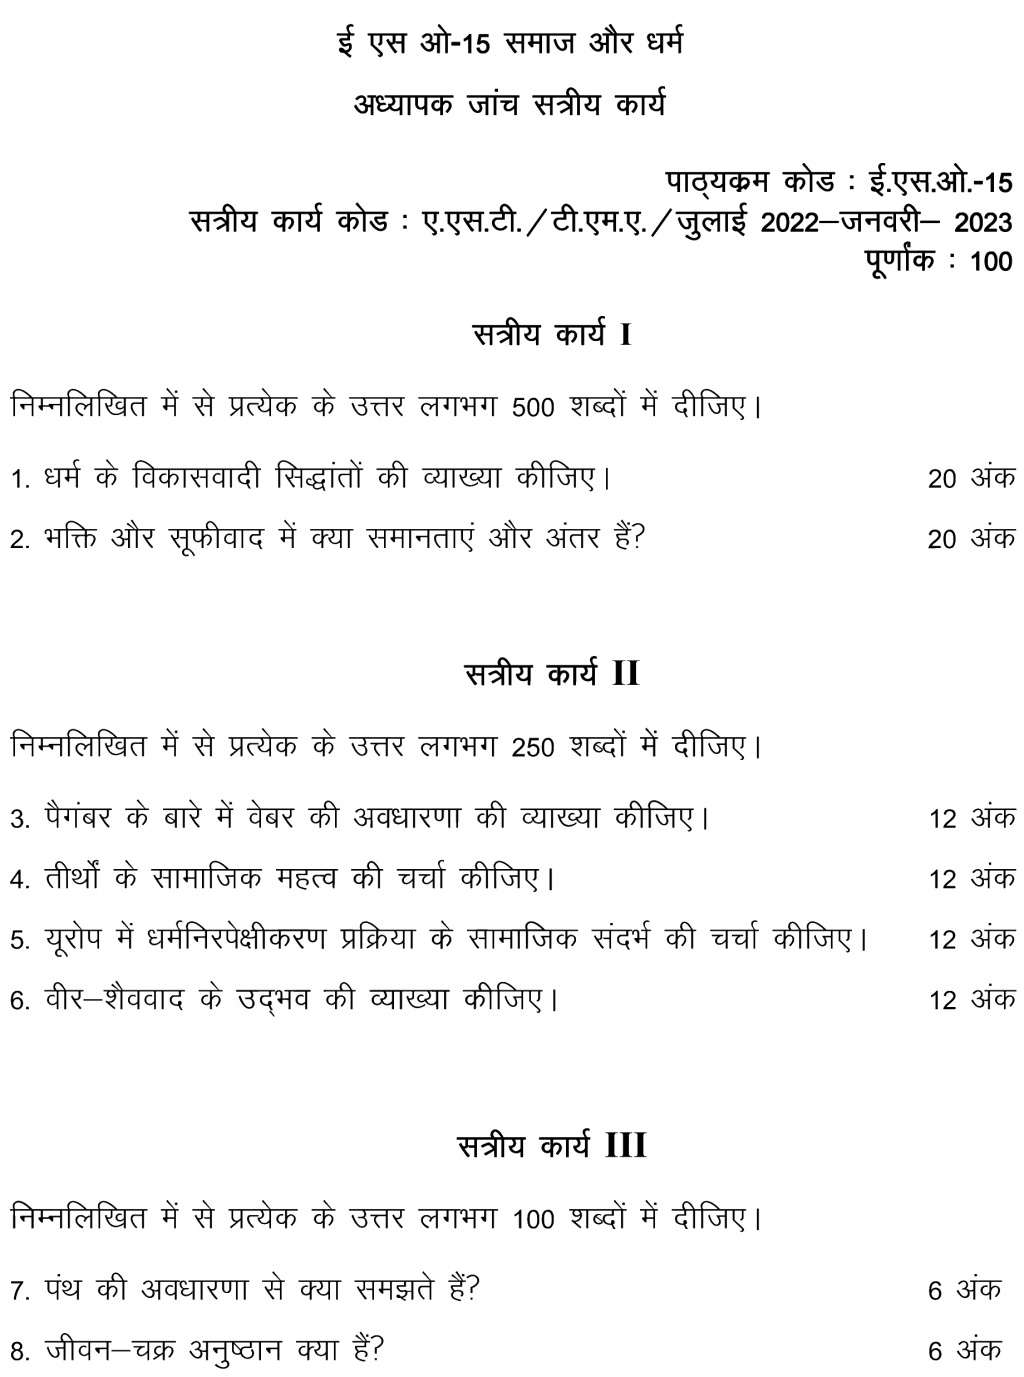 IGNOU ESO-05/15 - Society and Religion, Latest Solved Assignment-July 2022 – January 2023